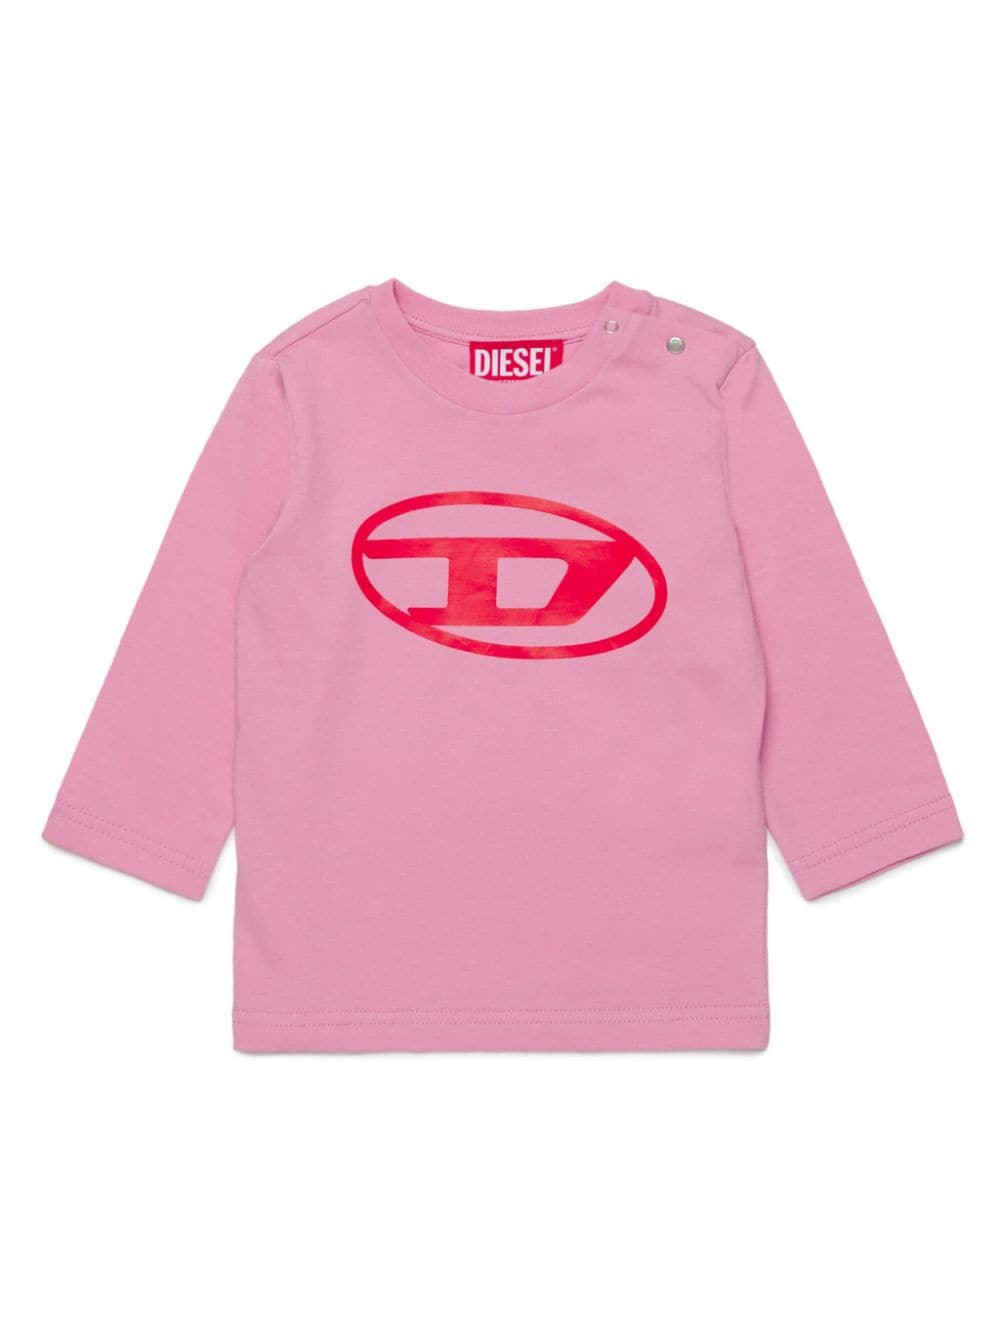 Diesel Babies' Oval D-print Cotton T-shirt In Pink